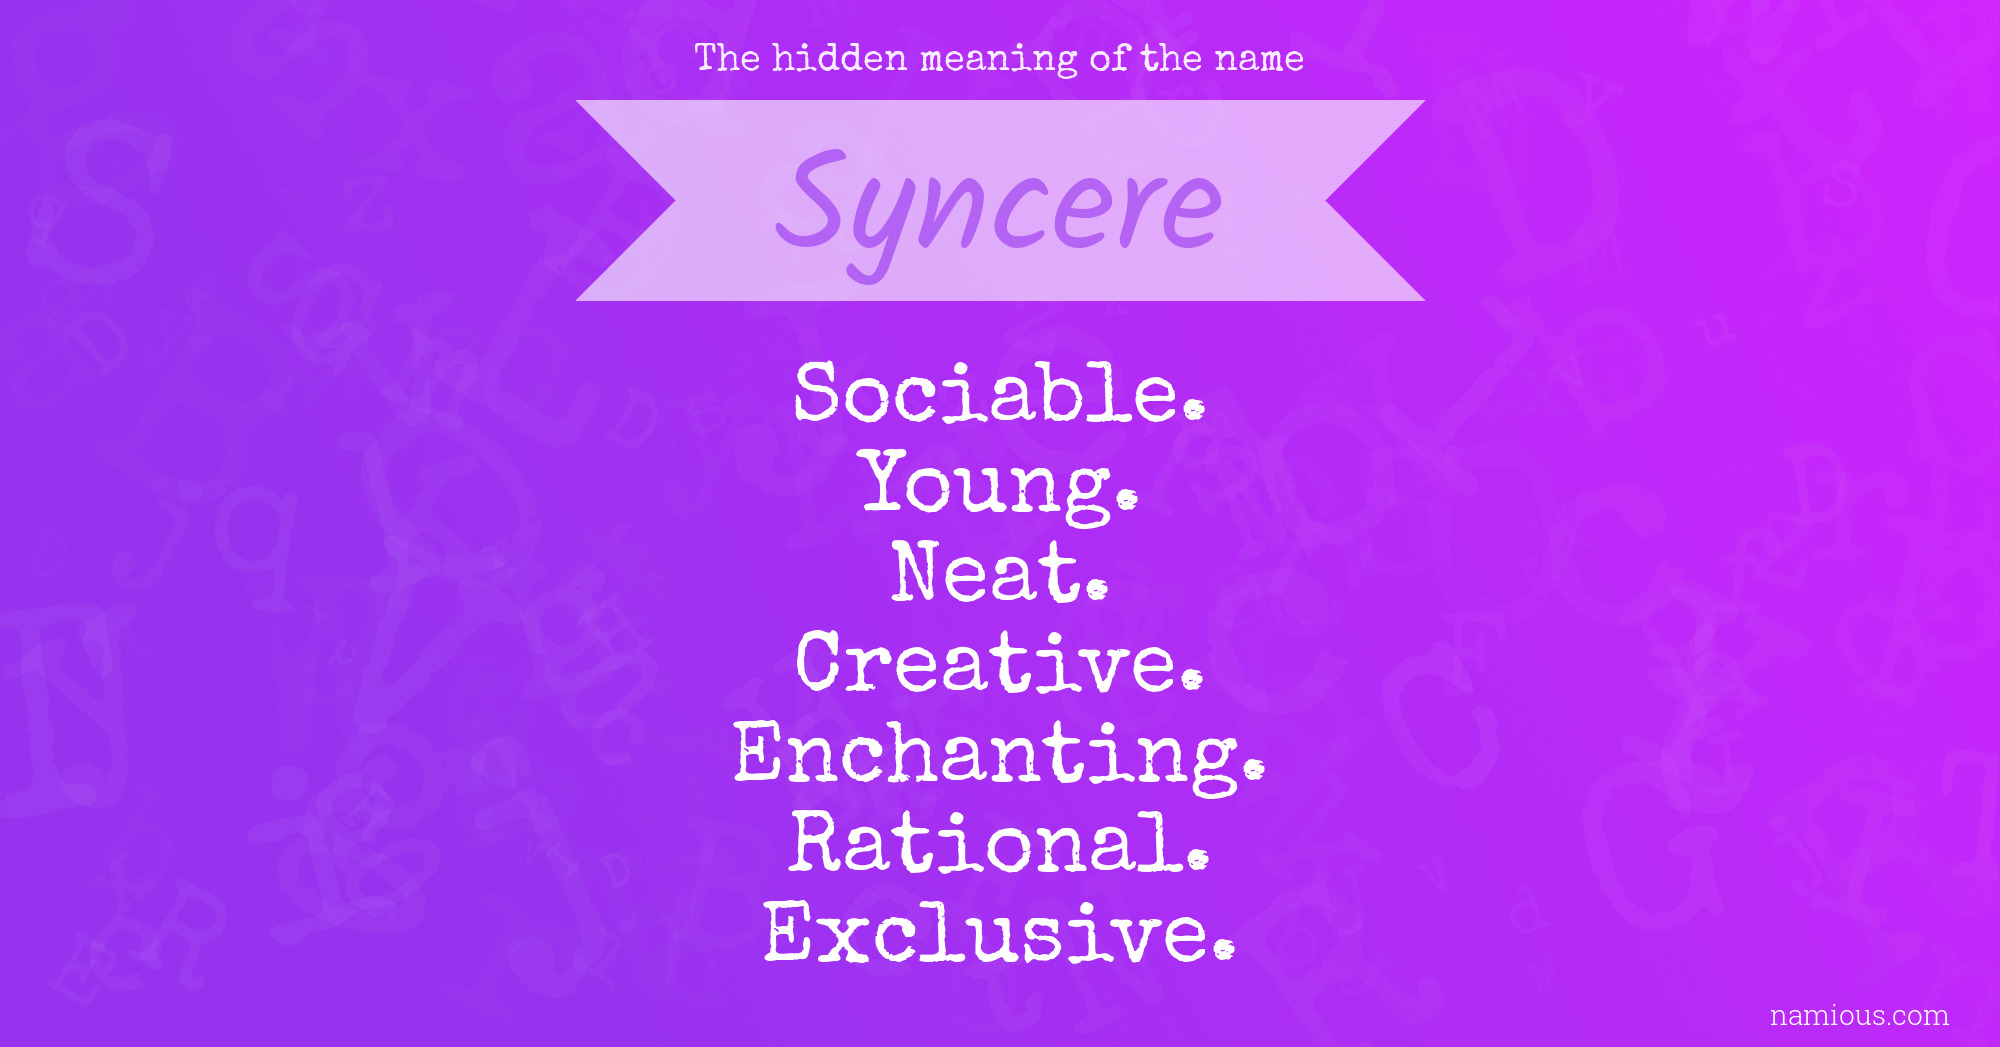 The hidden meaning of the name Syncere